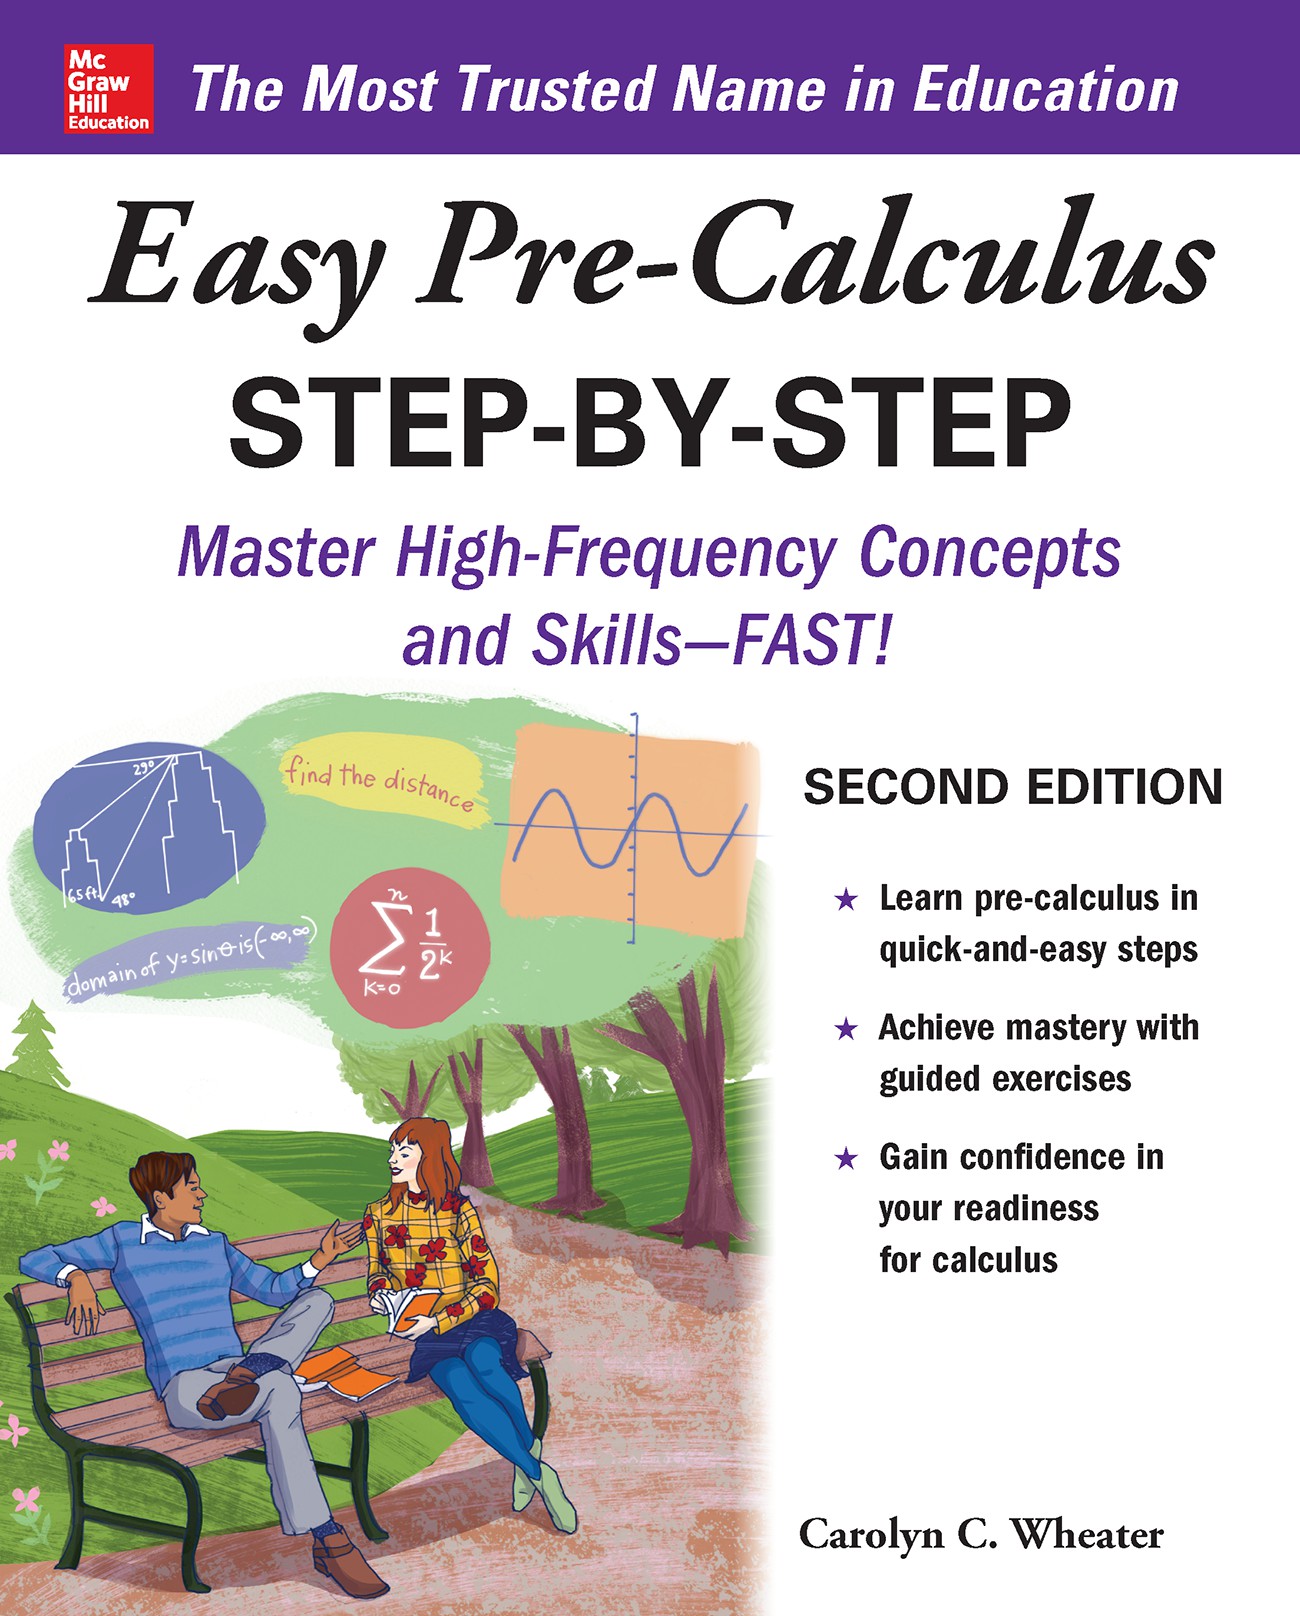 Easy Pre-Calculus Step-by-Step, Second Edition - 15-24.99